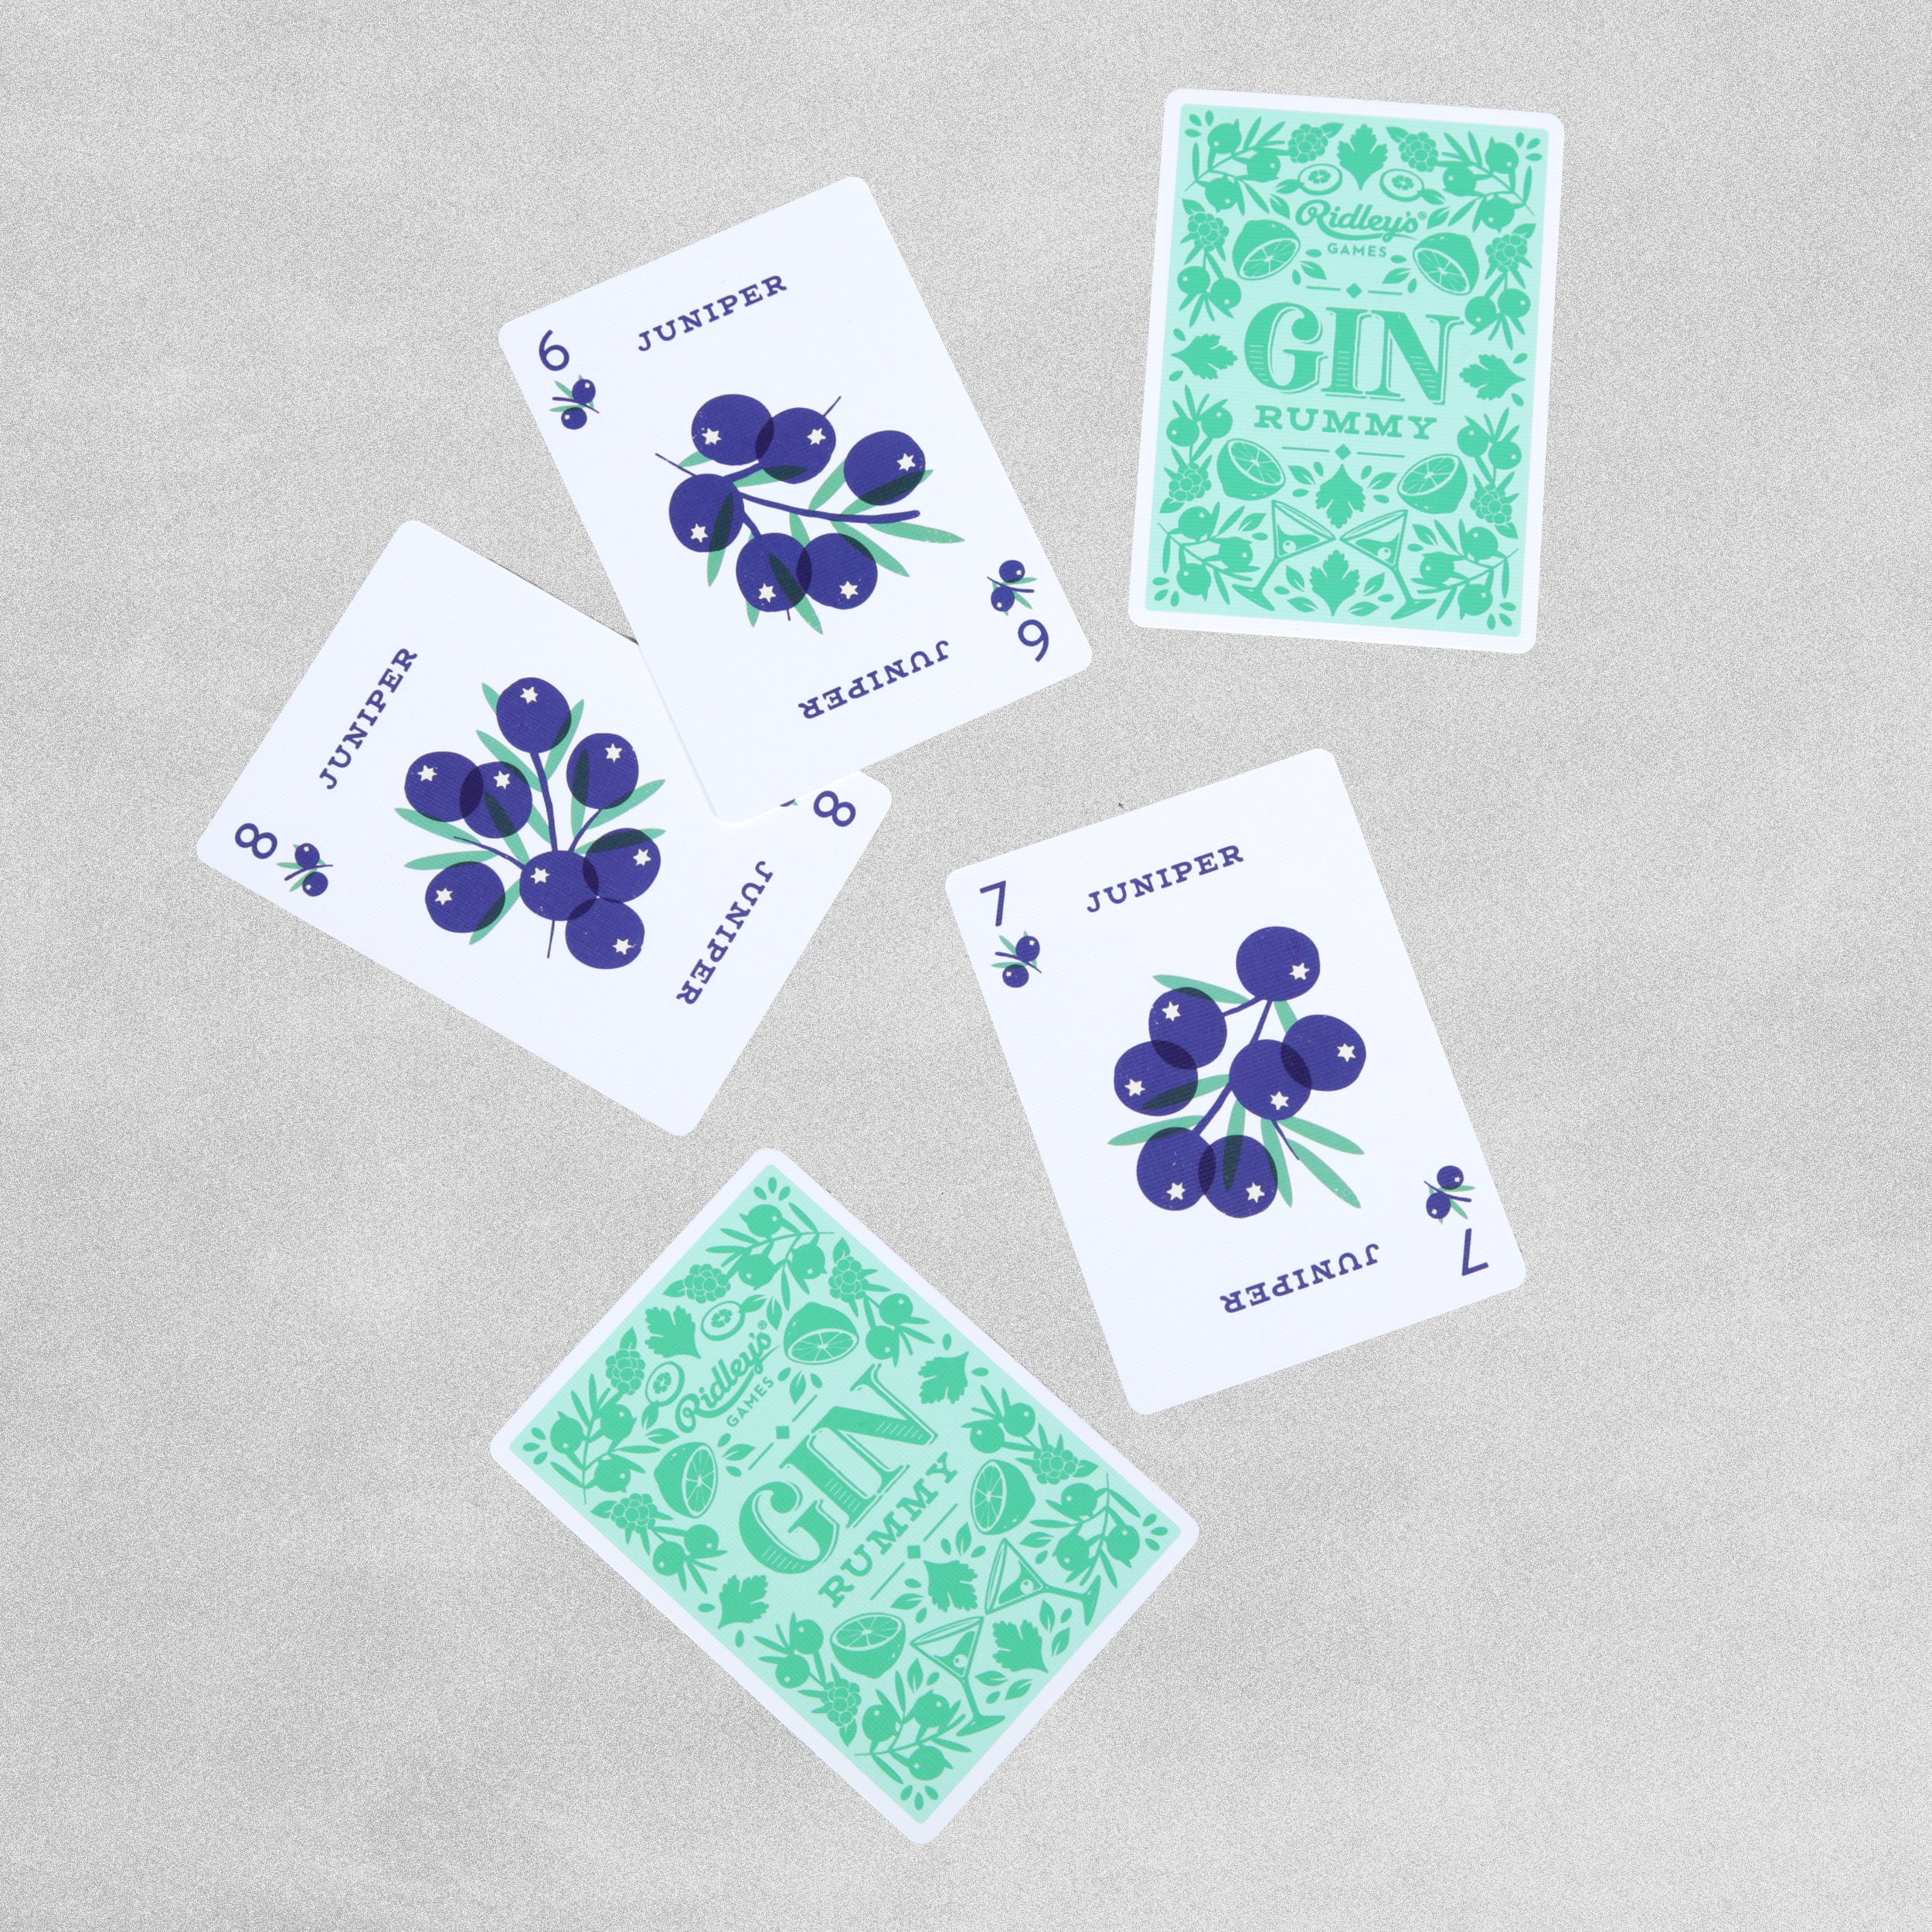 Gin Rummy - Illustrated Playing Cards